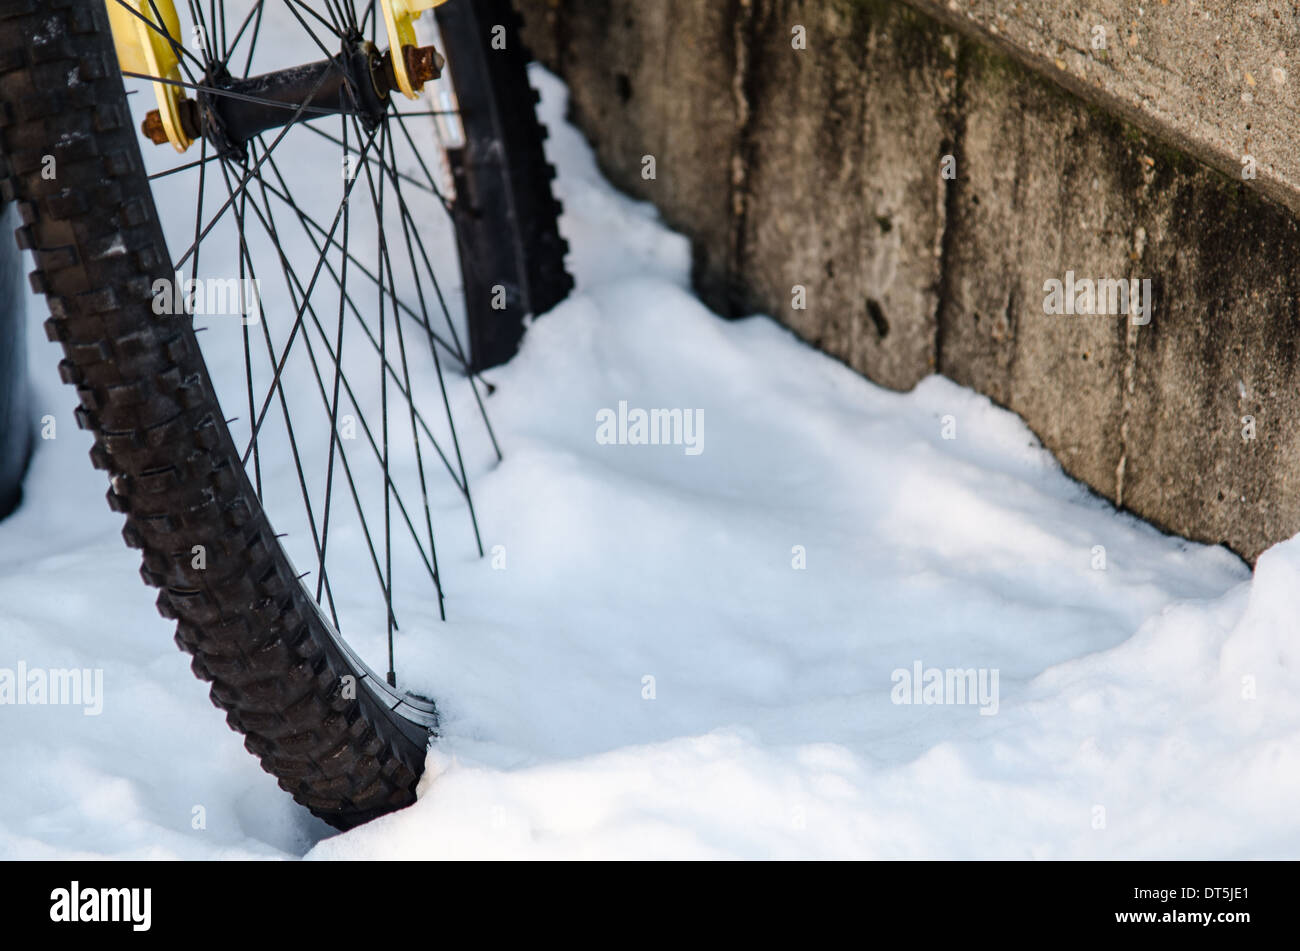 Bicycle wheel half buried in snow Stock Photo